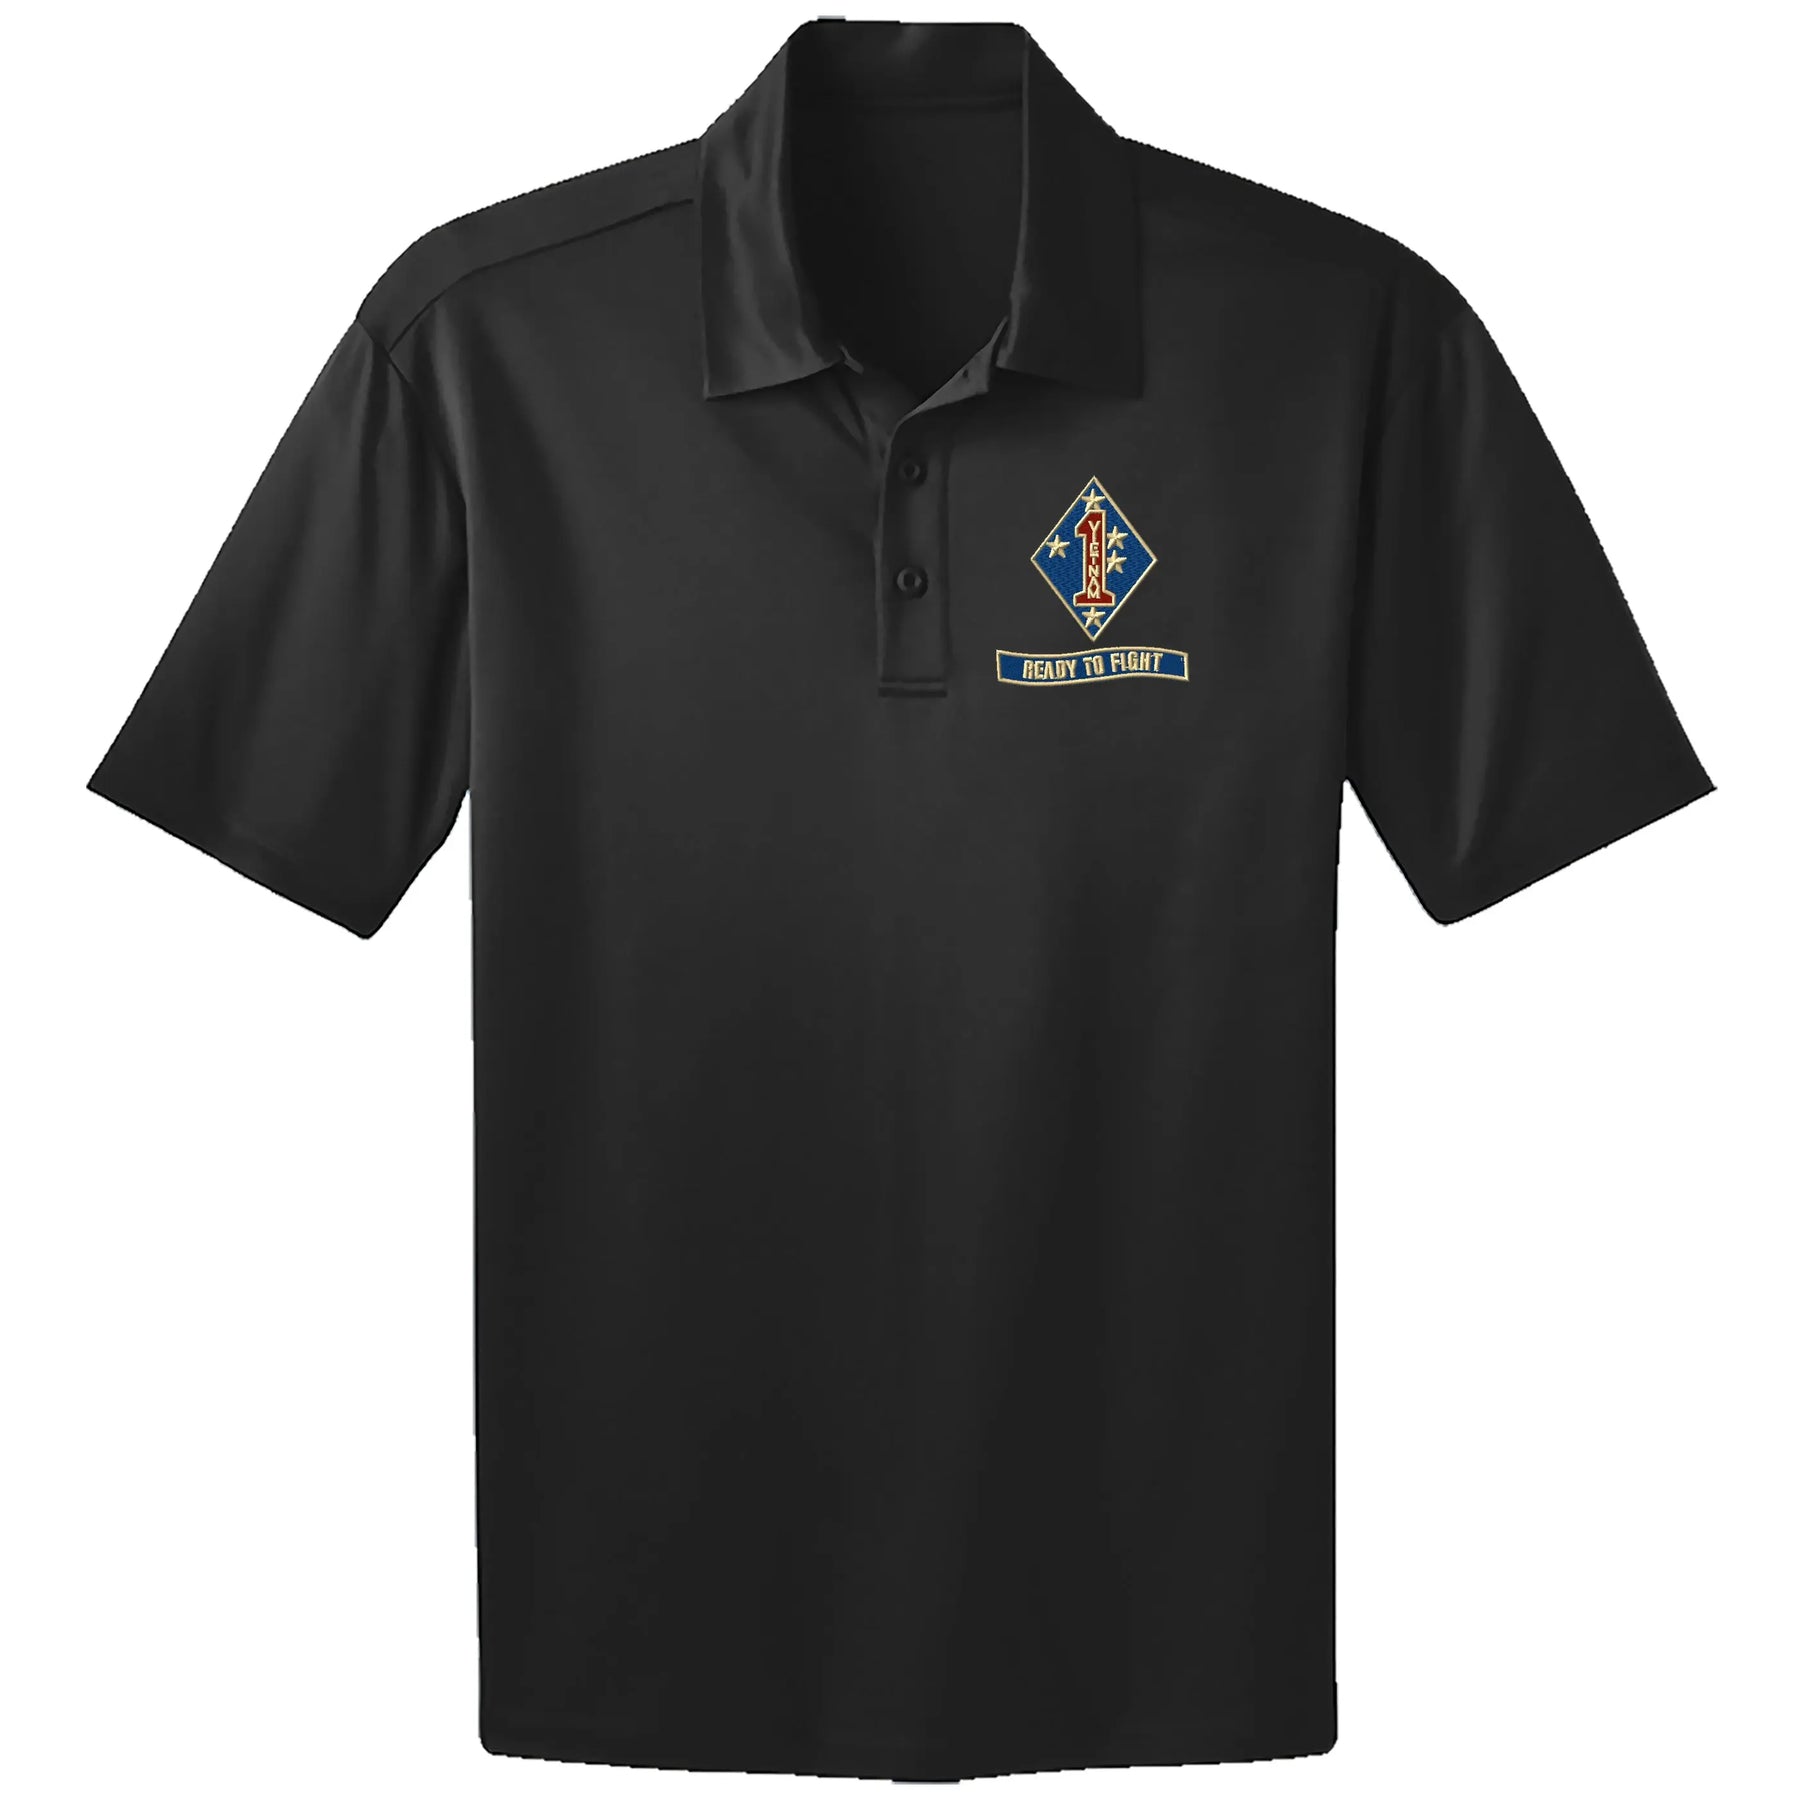 1st Mar Vietnam Div "Ready to Fight" Embroidered Performance Polo